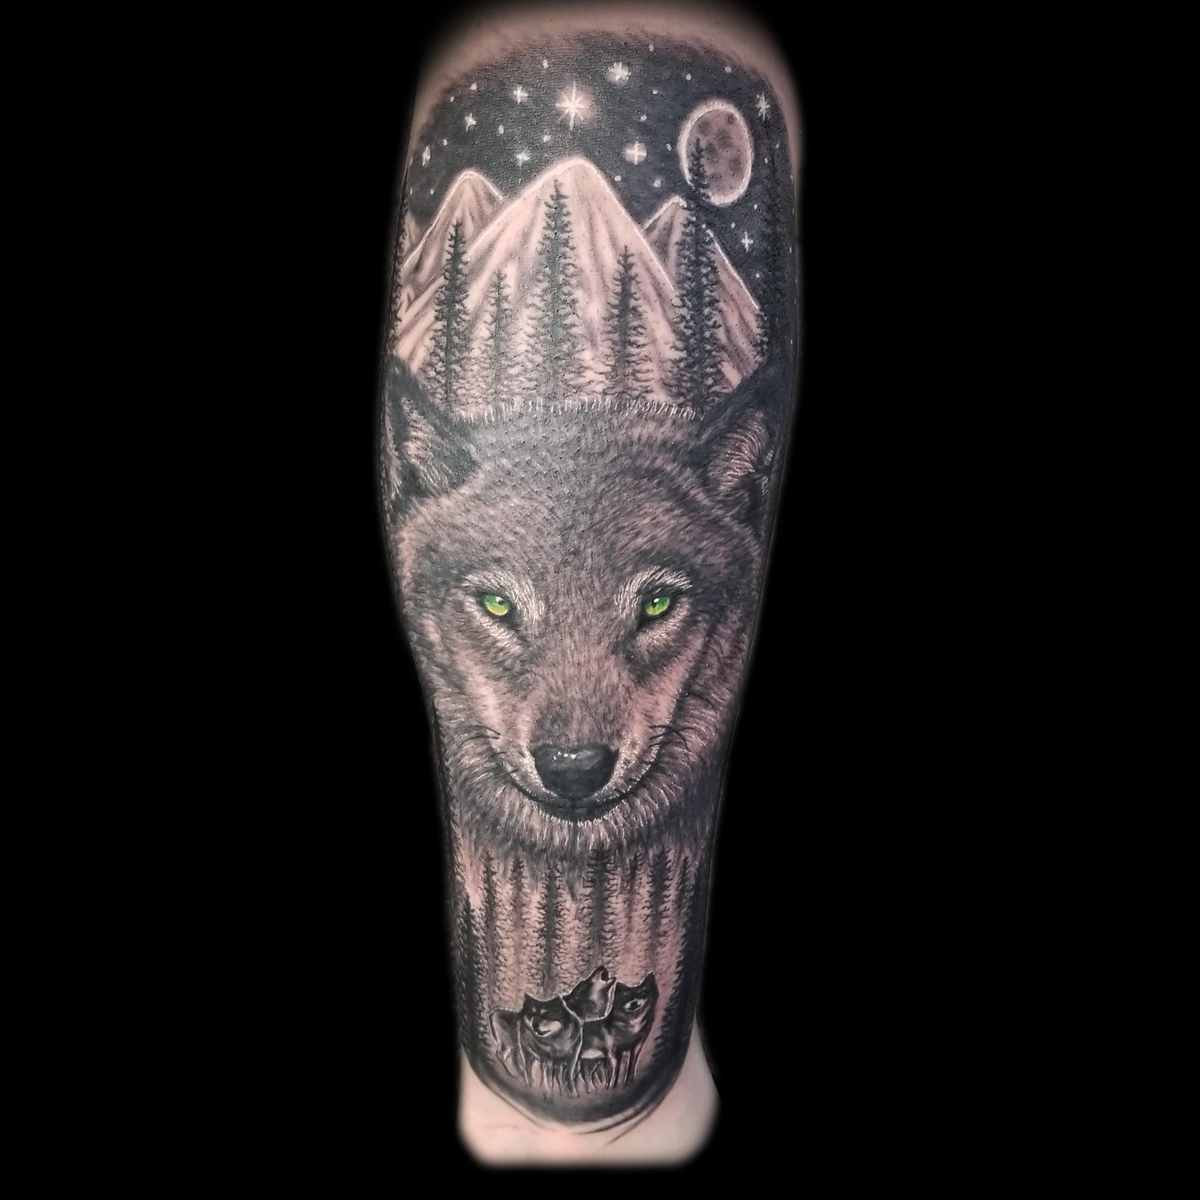 Pin by slengtattoo on Lions | Lion forearm tattoos, Lion tattoo sleeves,  Lion head tattoos